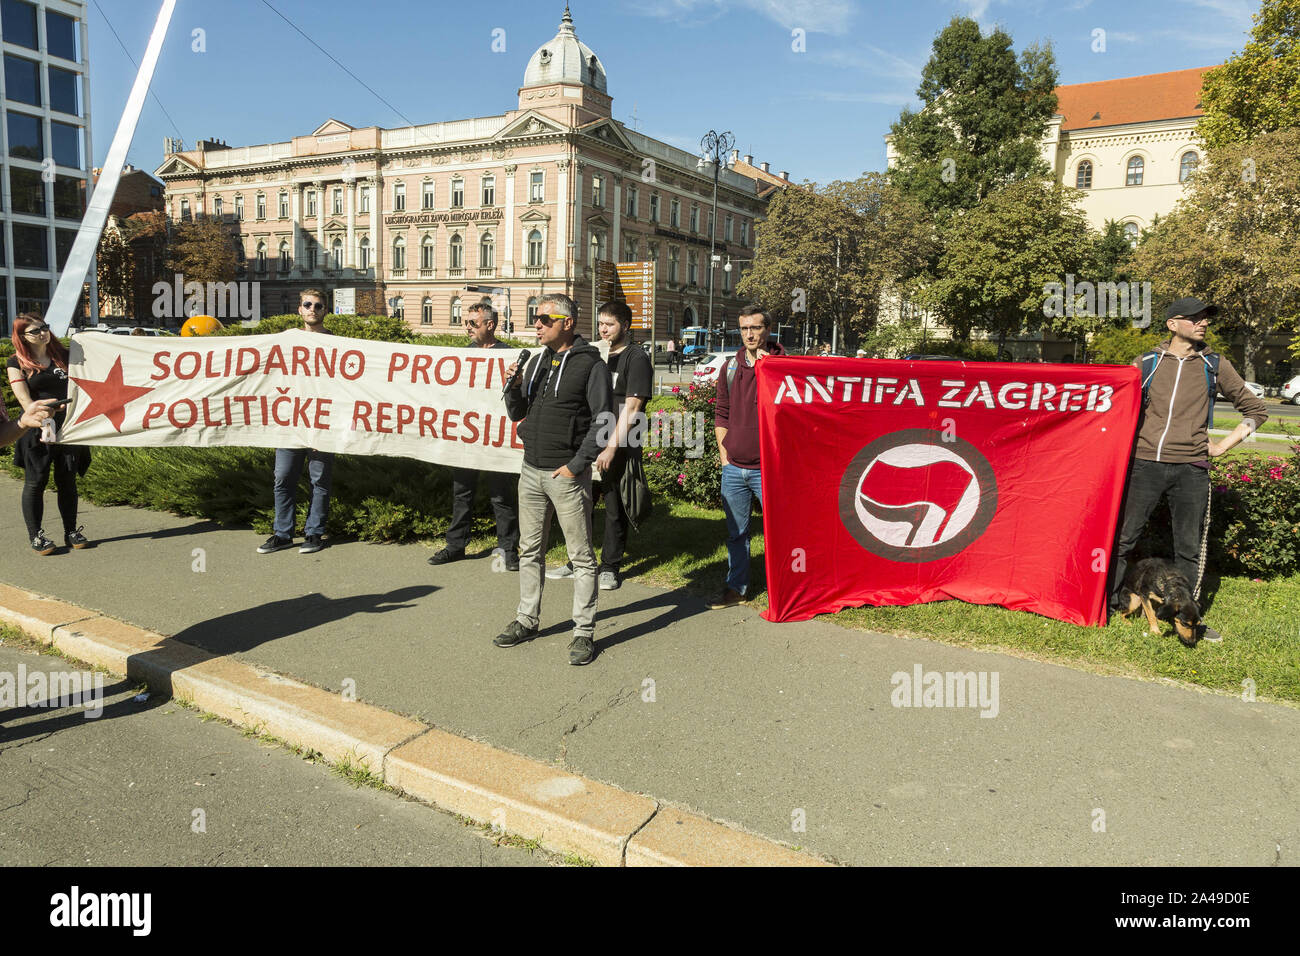 Demonstrations against right wing political parties in Croatia Stock Photo